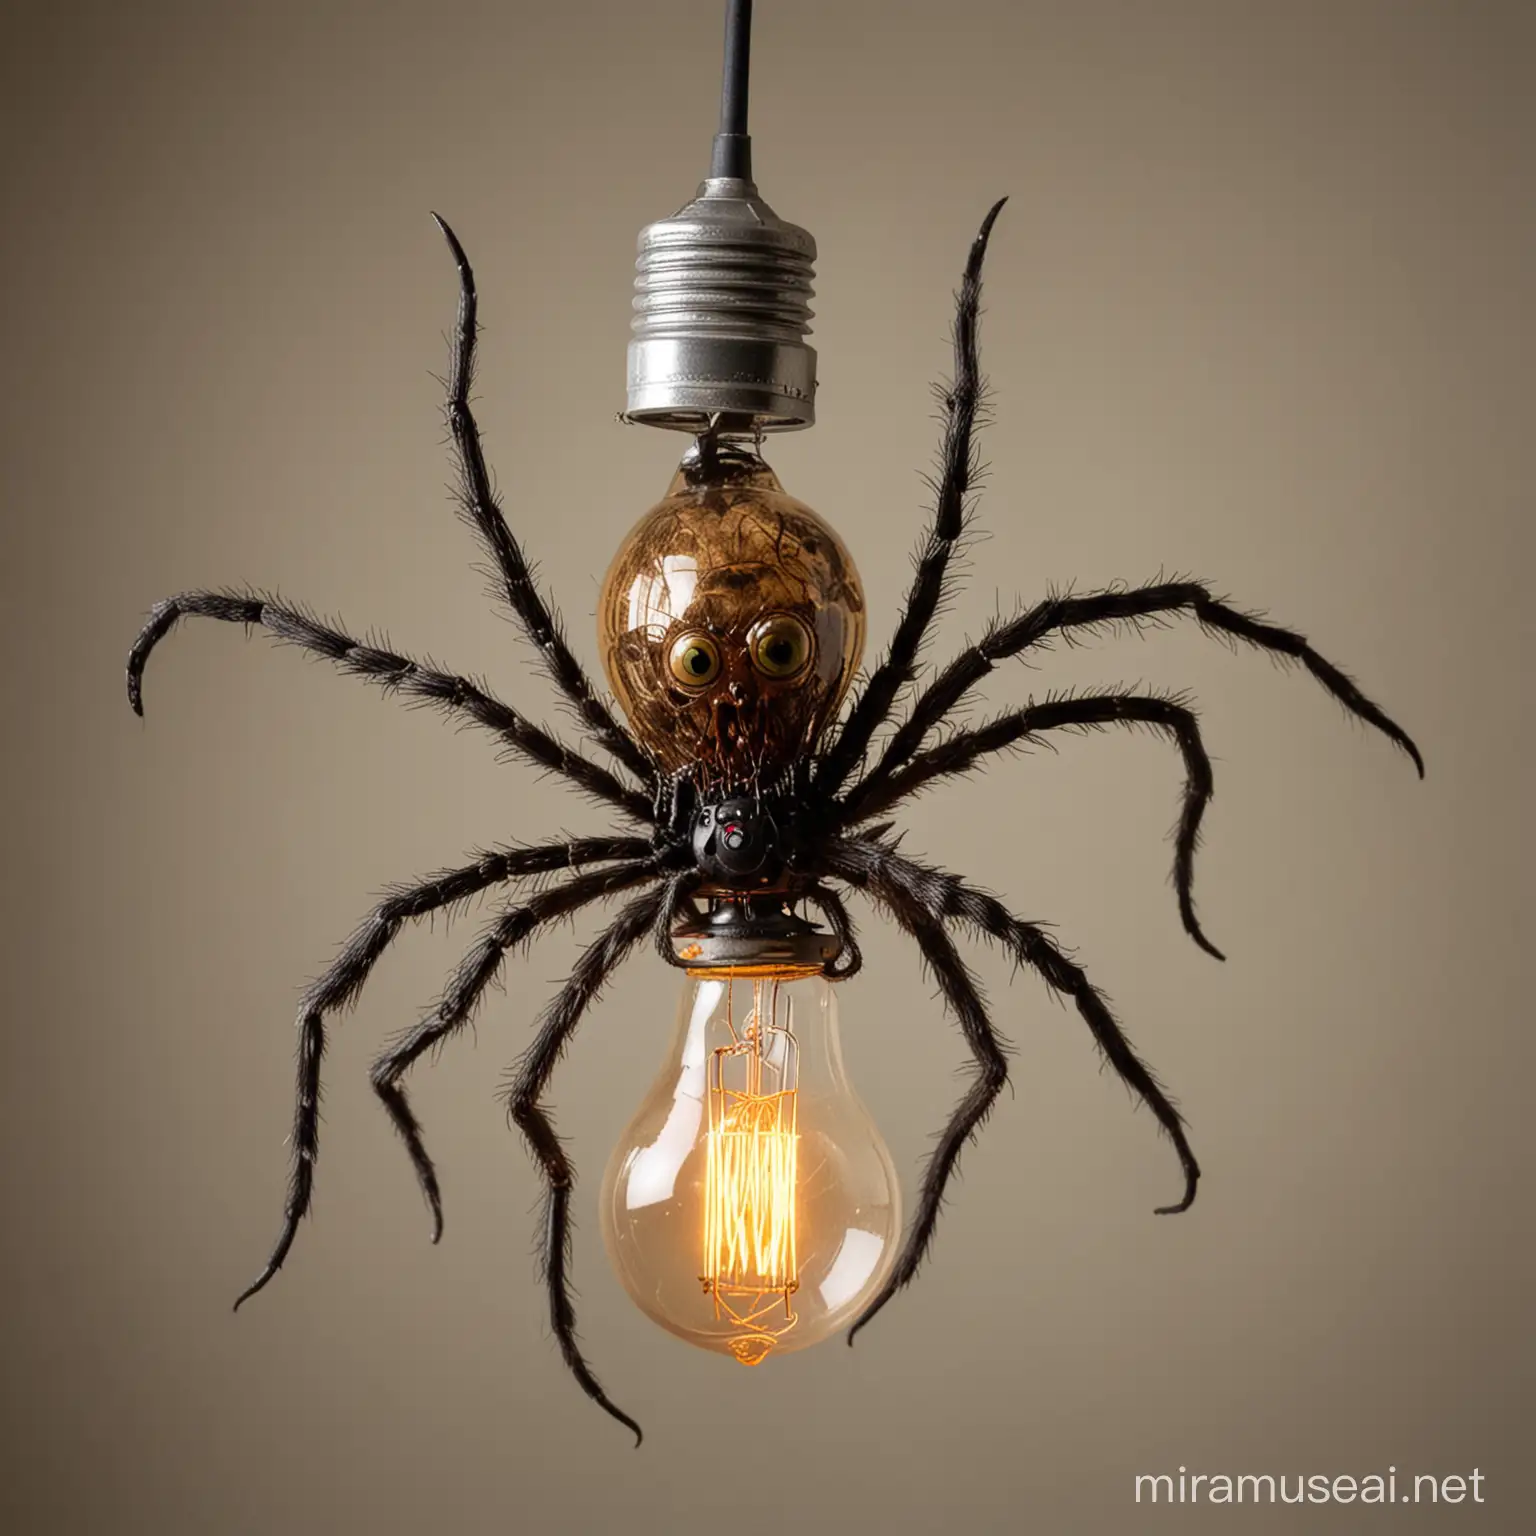 Vintage Lightbulb with Intriguing Zombie Spider